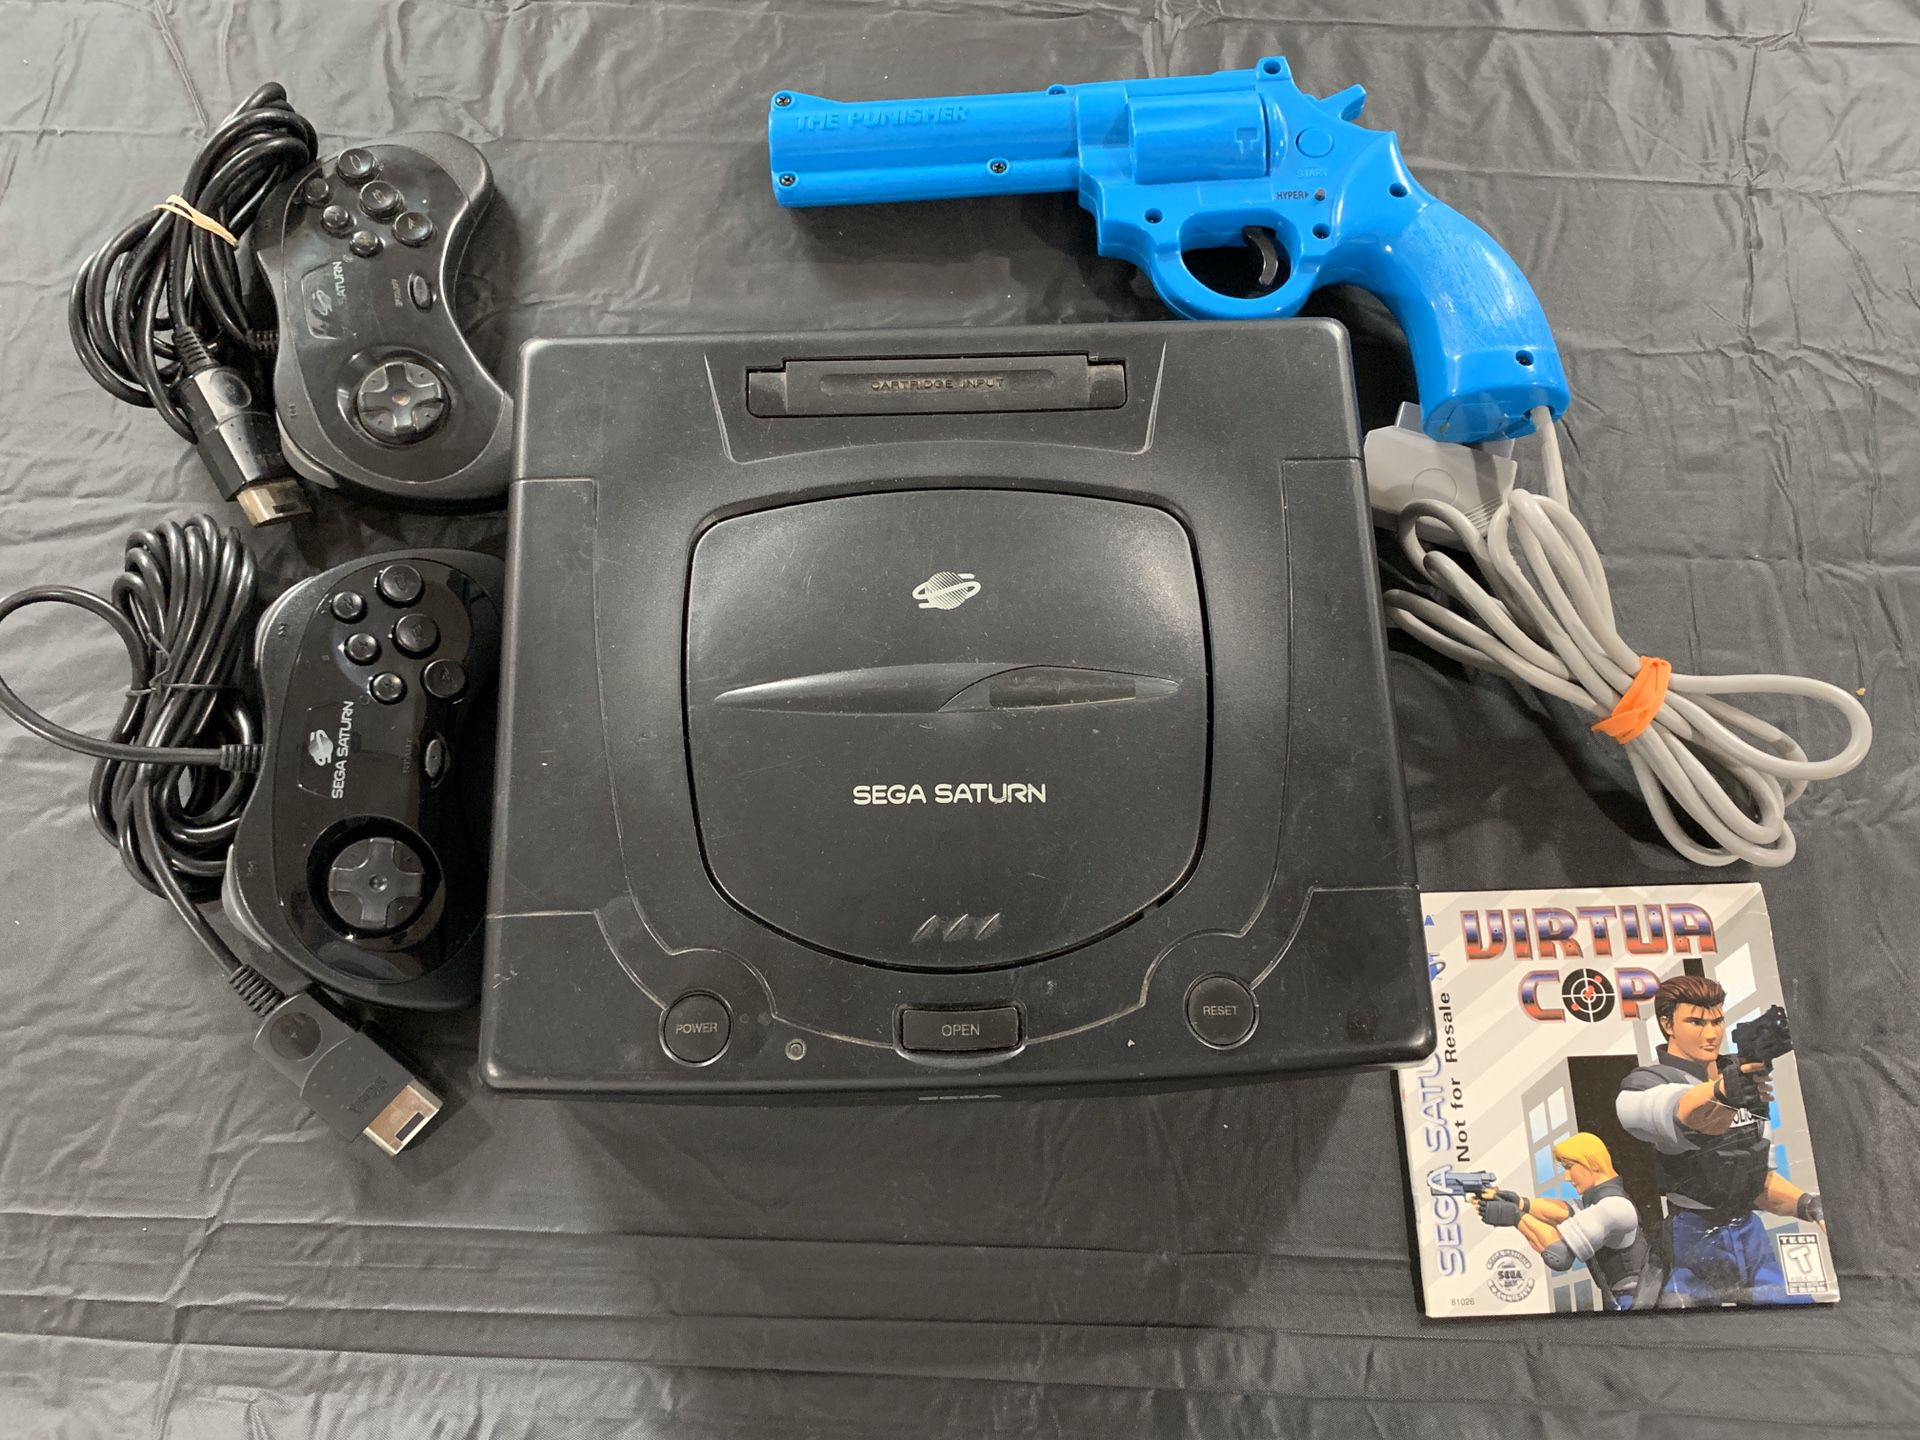 Sega Saturn for sale (Tested and working)